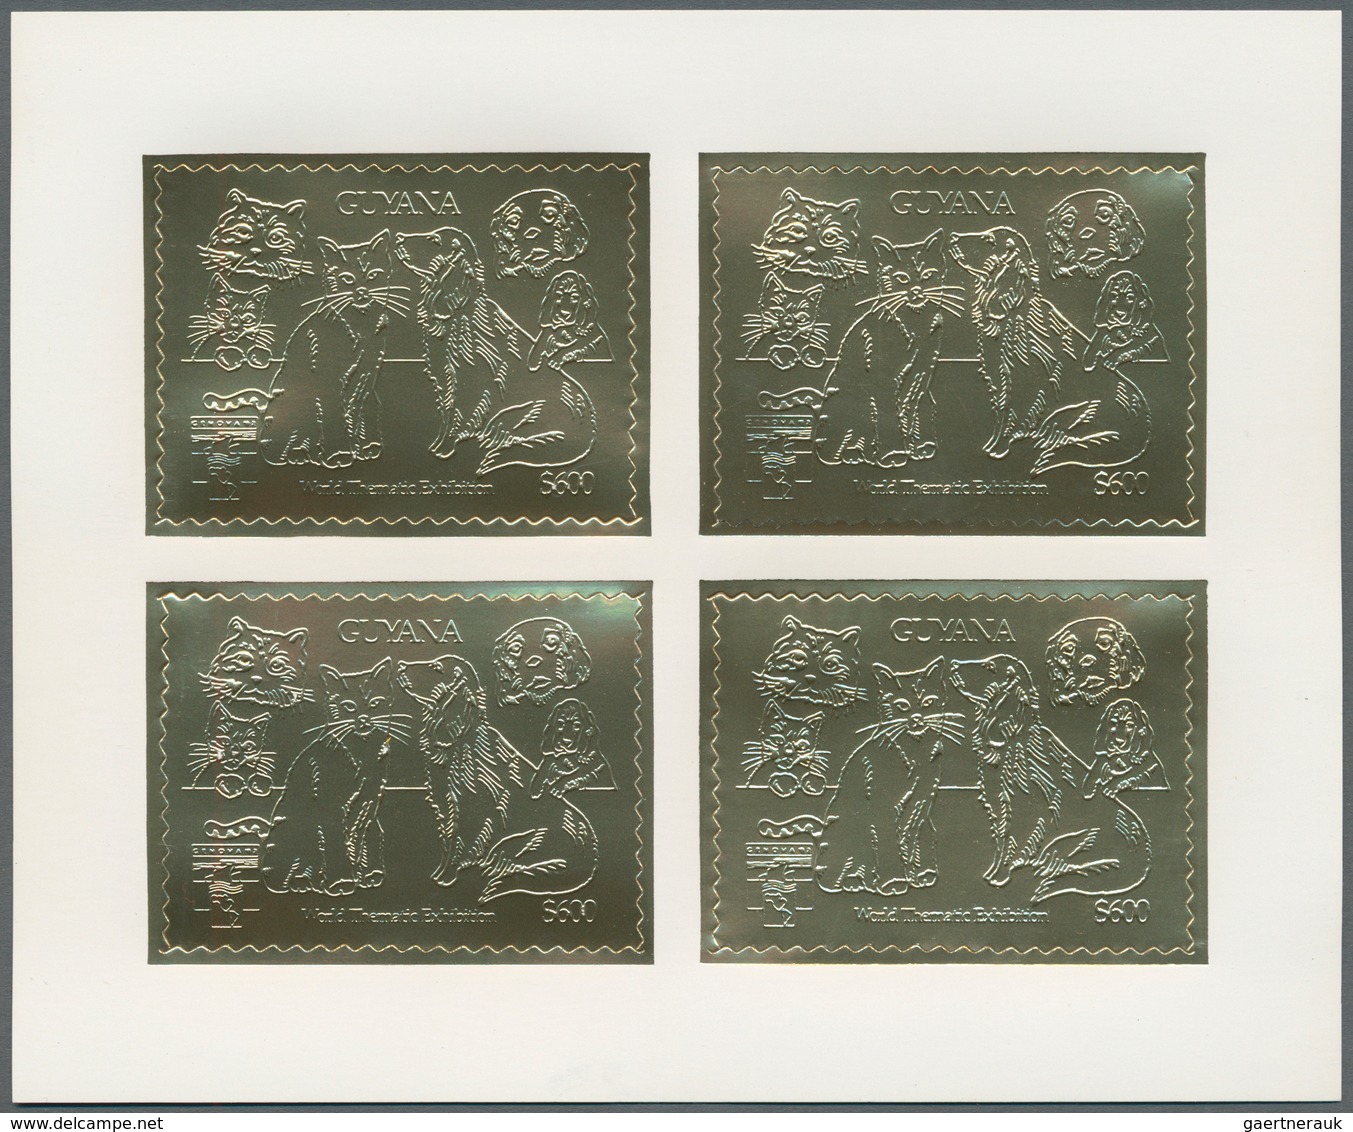 Thematik: Tiere-Hunde / Animals-dogs: 1992, Guyana. Lot Containing 45 GOLD Miniature Sheets Of 4 And - Hunde